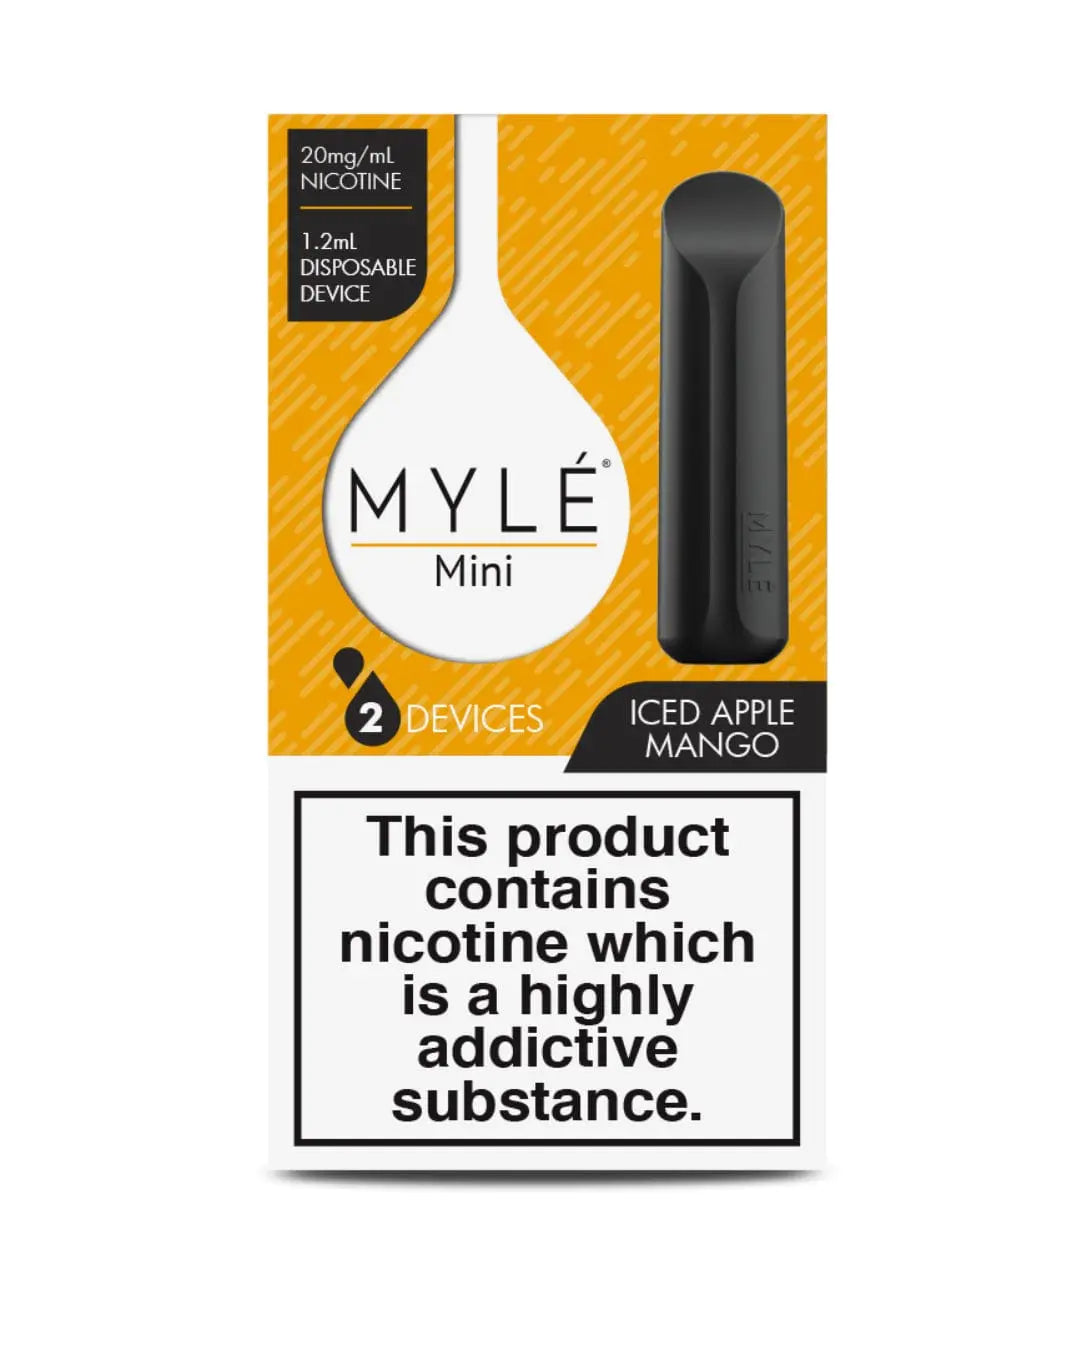 Iced Apple Mango - Mini Myle - Pack of 2 Devices Disposable Vapes